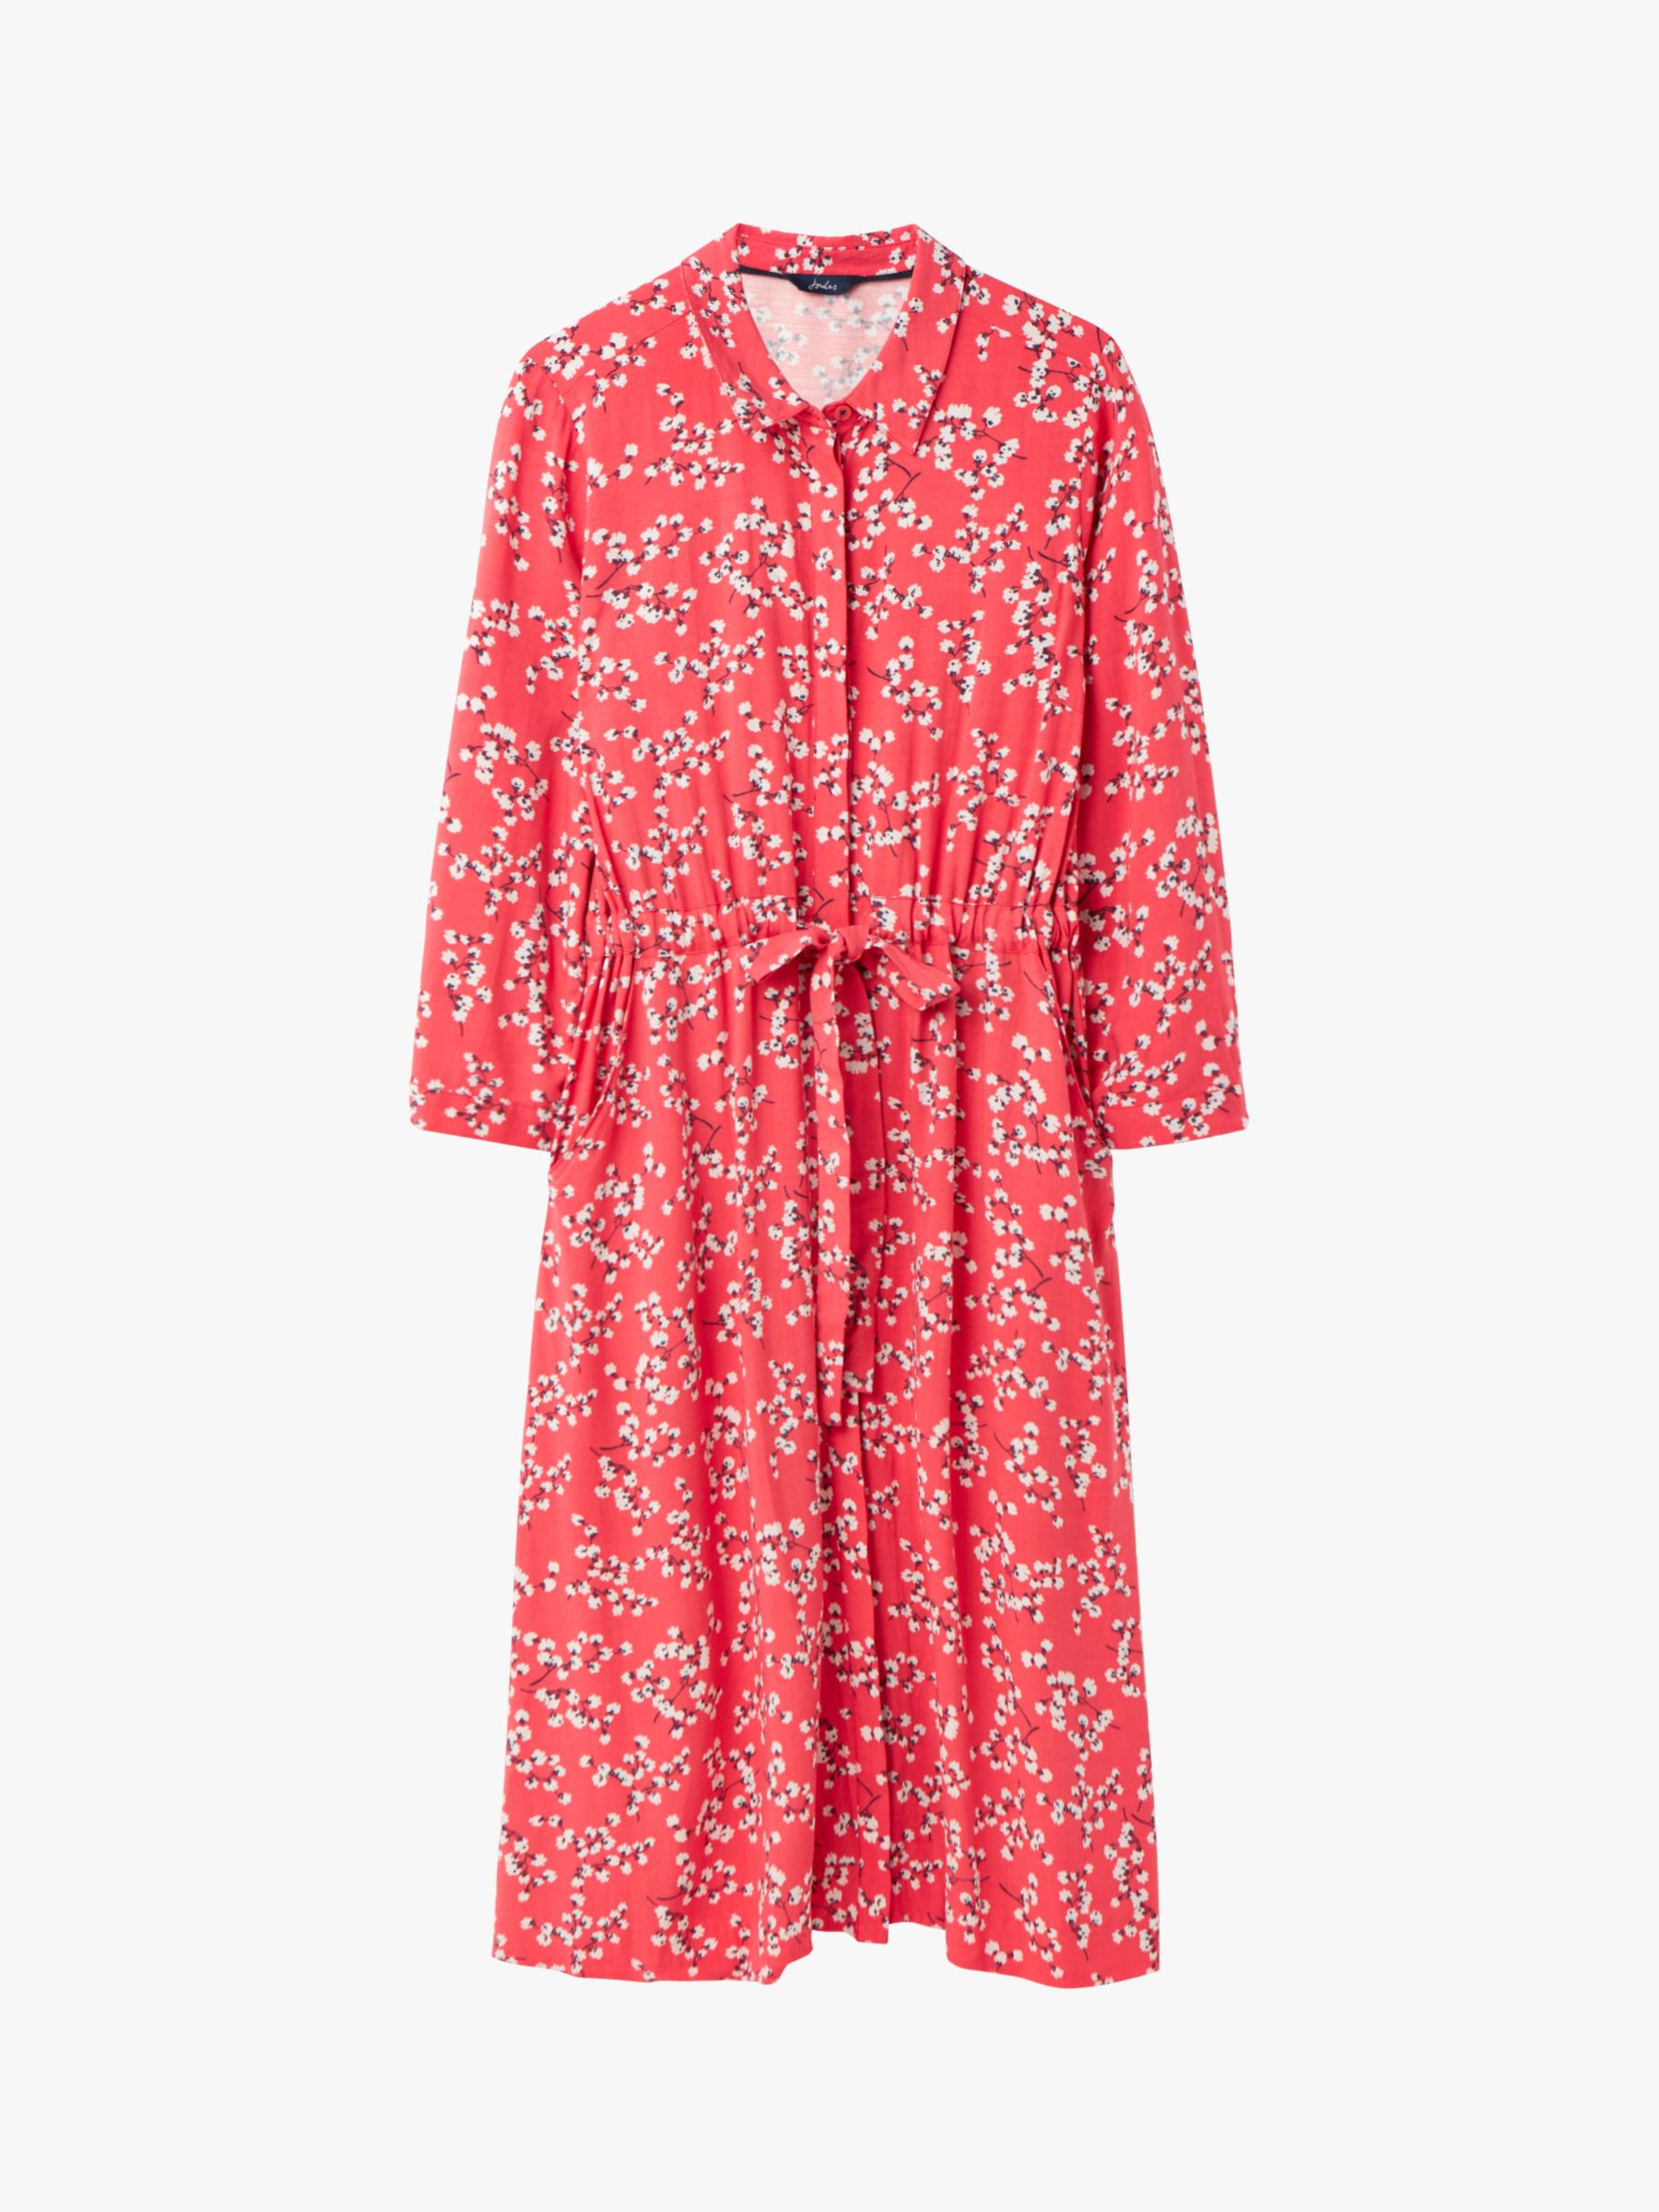 Joules Winslet Floral Button Dress, Red Ditsy